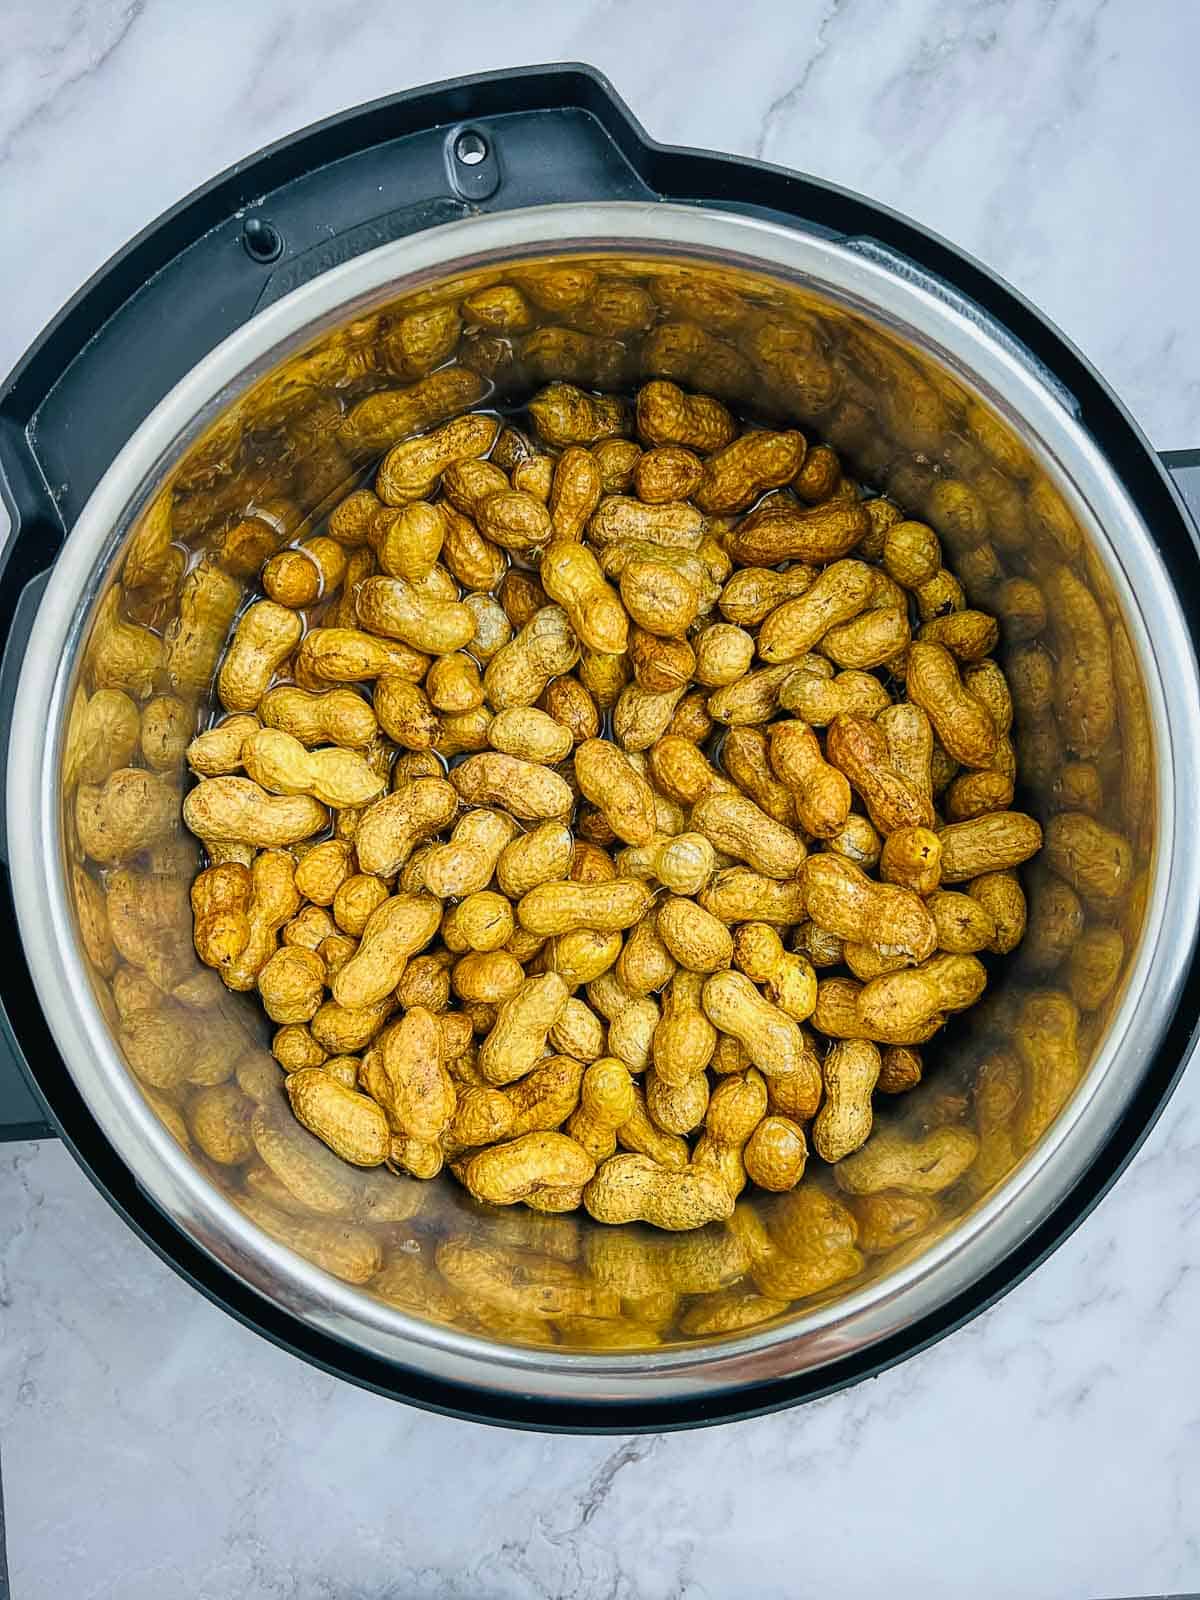 Cleaned unshelled raw peanuts in the Instant Pot.